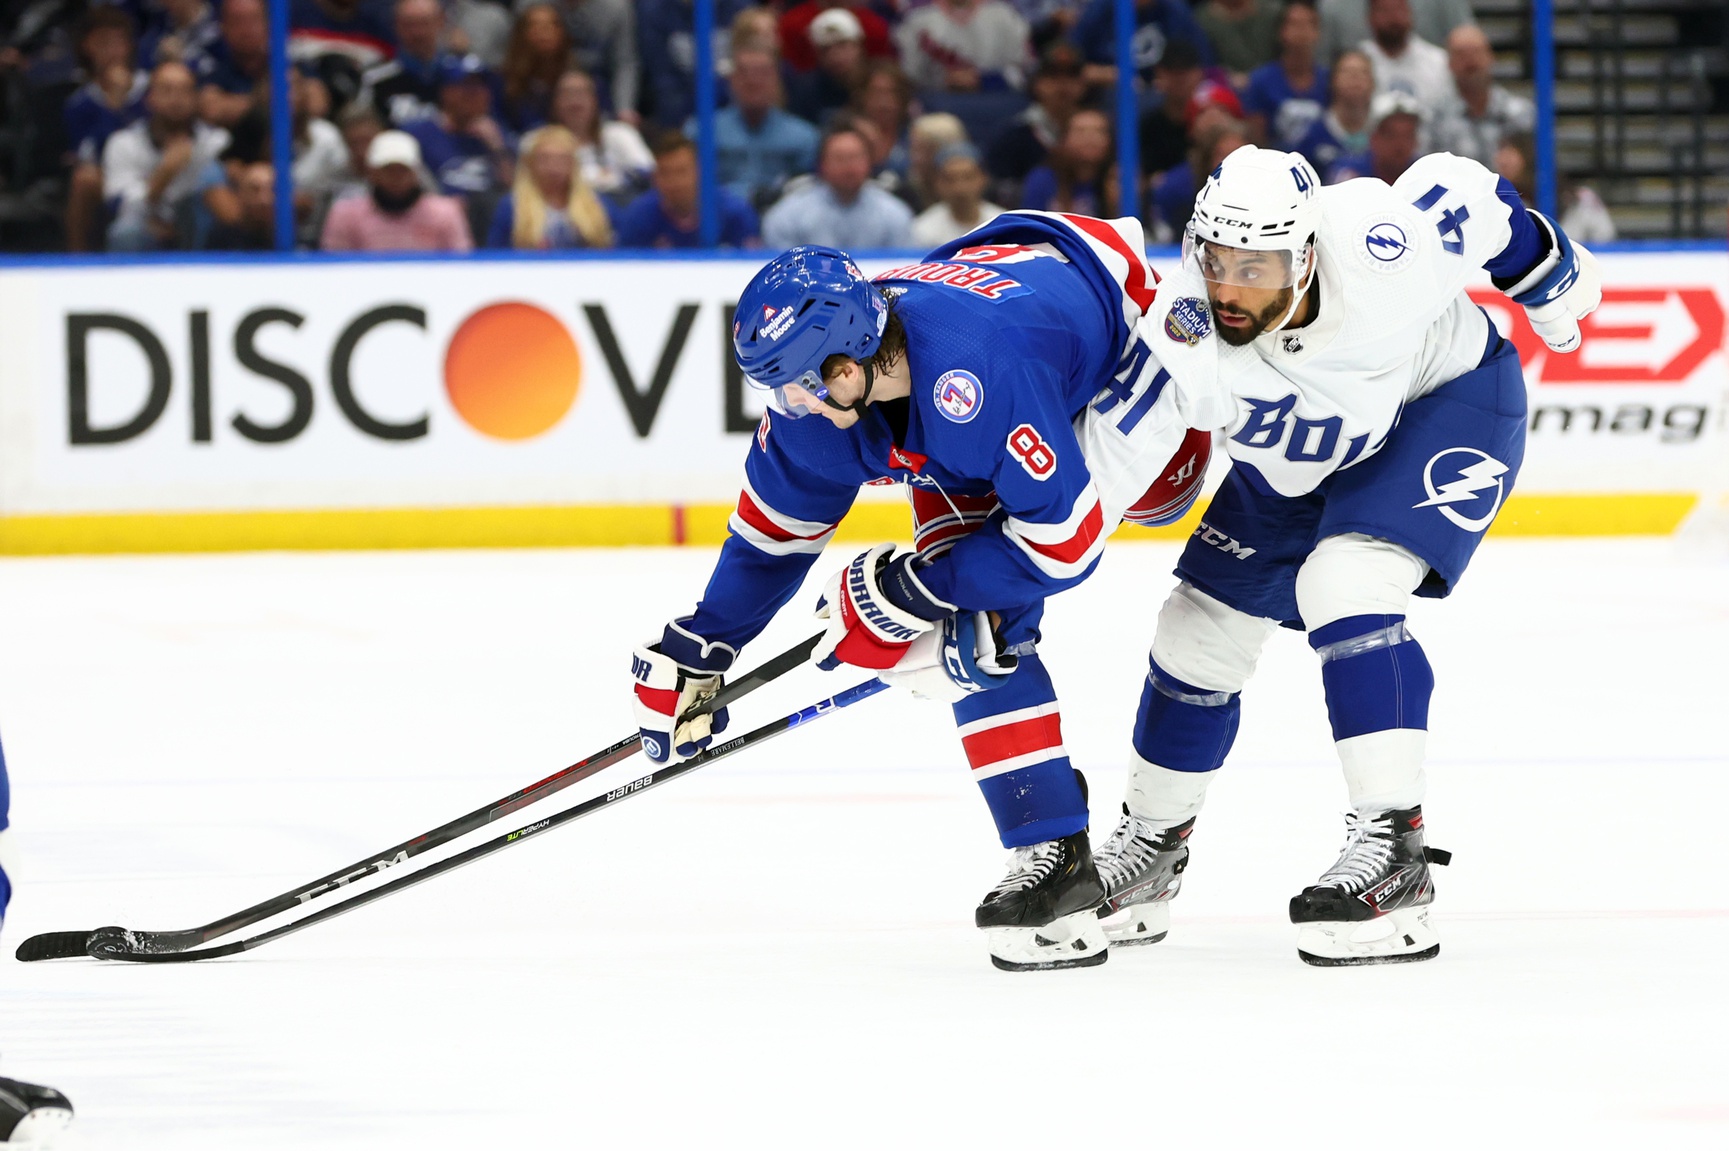 Tampa Bay Lightning left wing Pierre-Edouard Bellemare (41) battles for the puck against New York Rangers defenseman Jacob Trouba (8) during the third period at Amalie Arena.